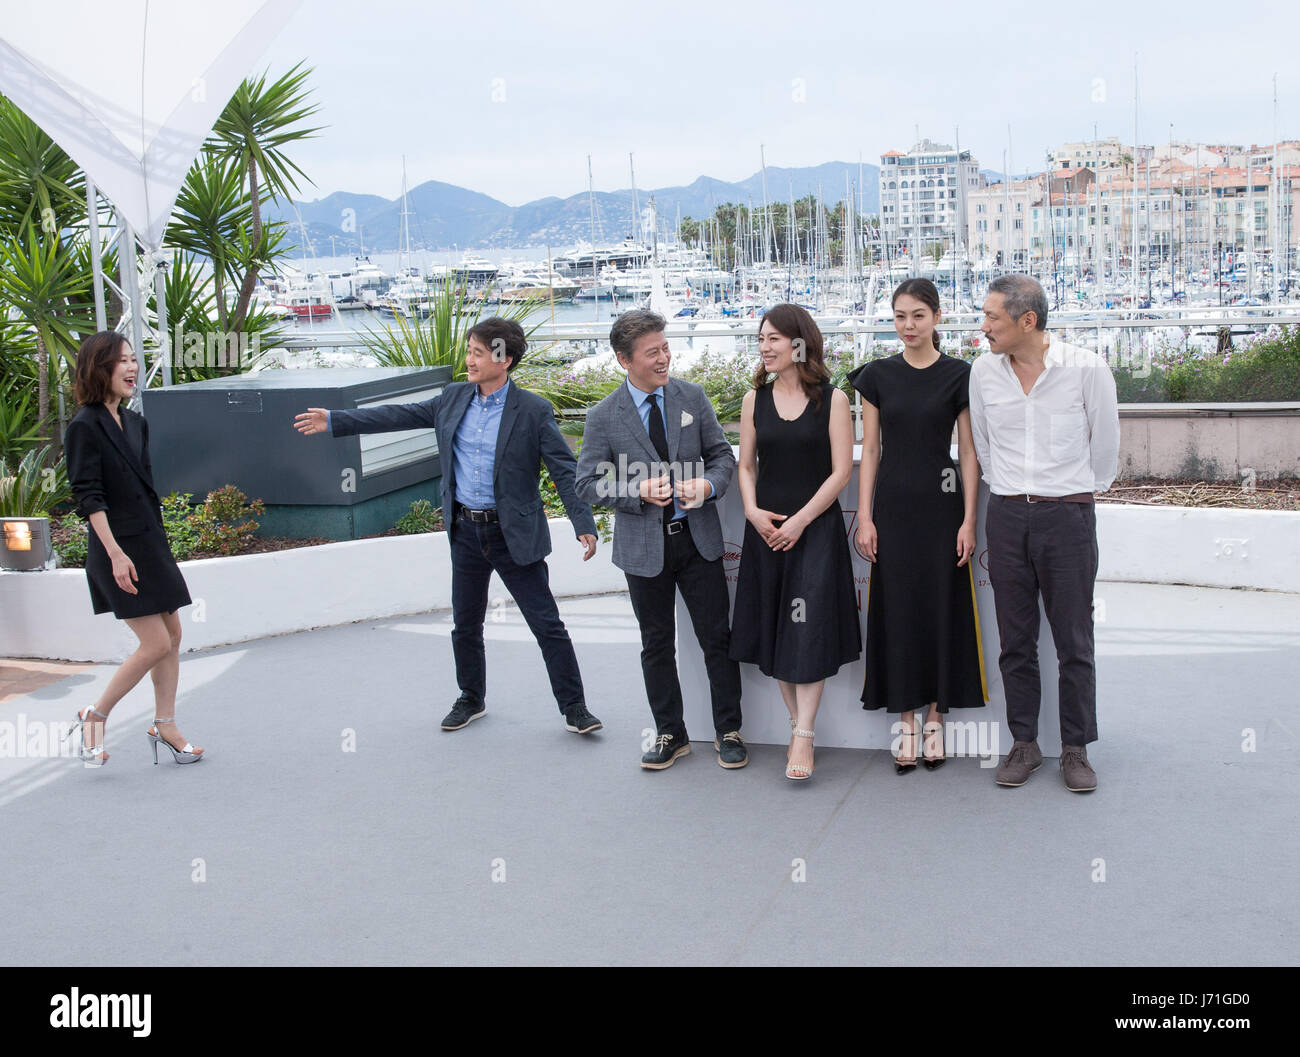 Cannes, France. 22nd May, 2017. Director Hong SangSoo (1st R) and cast members attend a photocall of the film "The Day After" during the 70th Cannes Film Festival at Palais des Festivals in Cannes, France, on May 22, 2017. The film "The Day After" directed by Hong SangSoo will compete for the Palme d'Or on the 70th Cannes Film Festival. Credit: Xu Jinquan/Xinhua/Alamy Live News Stock Photo